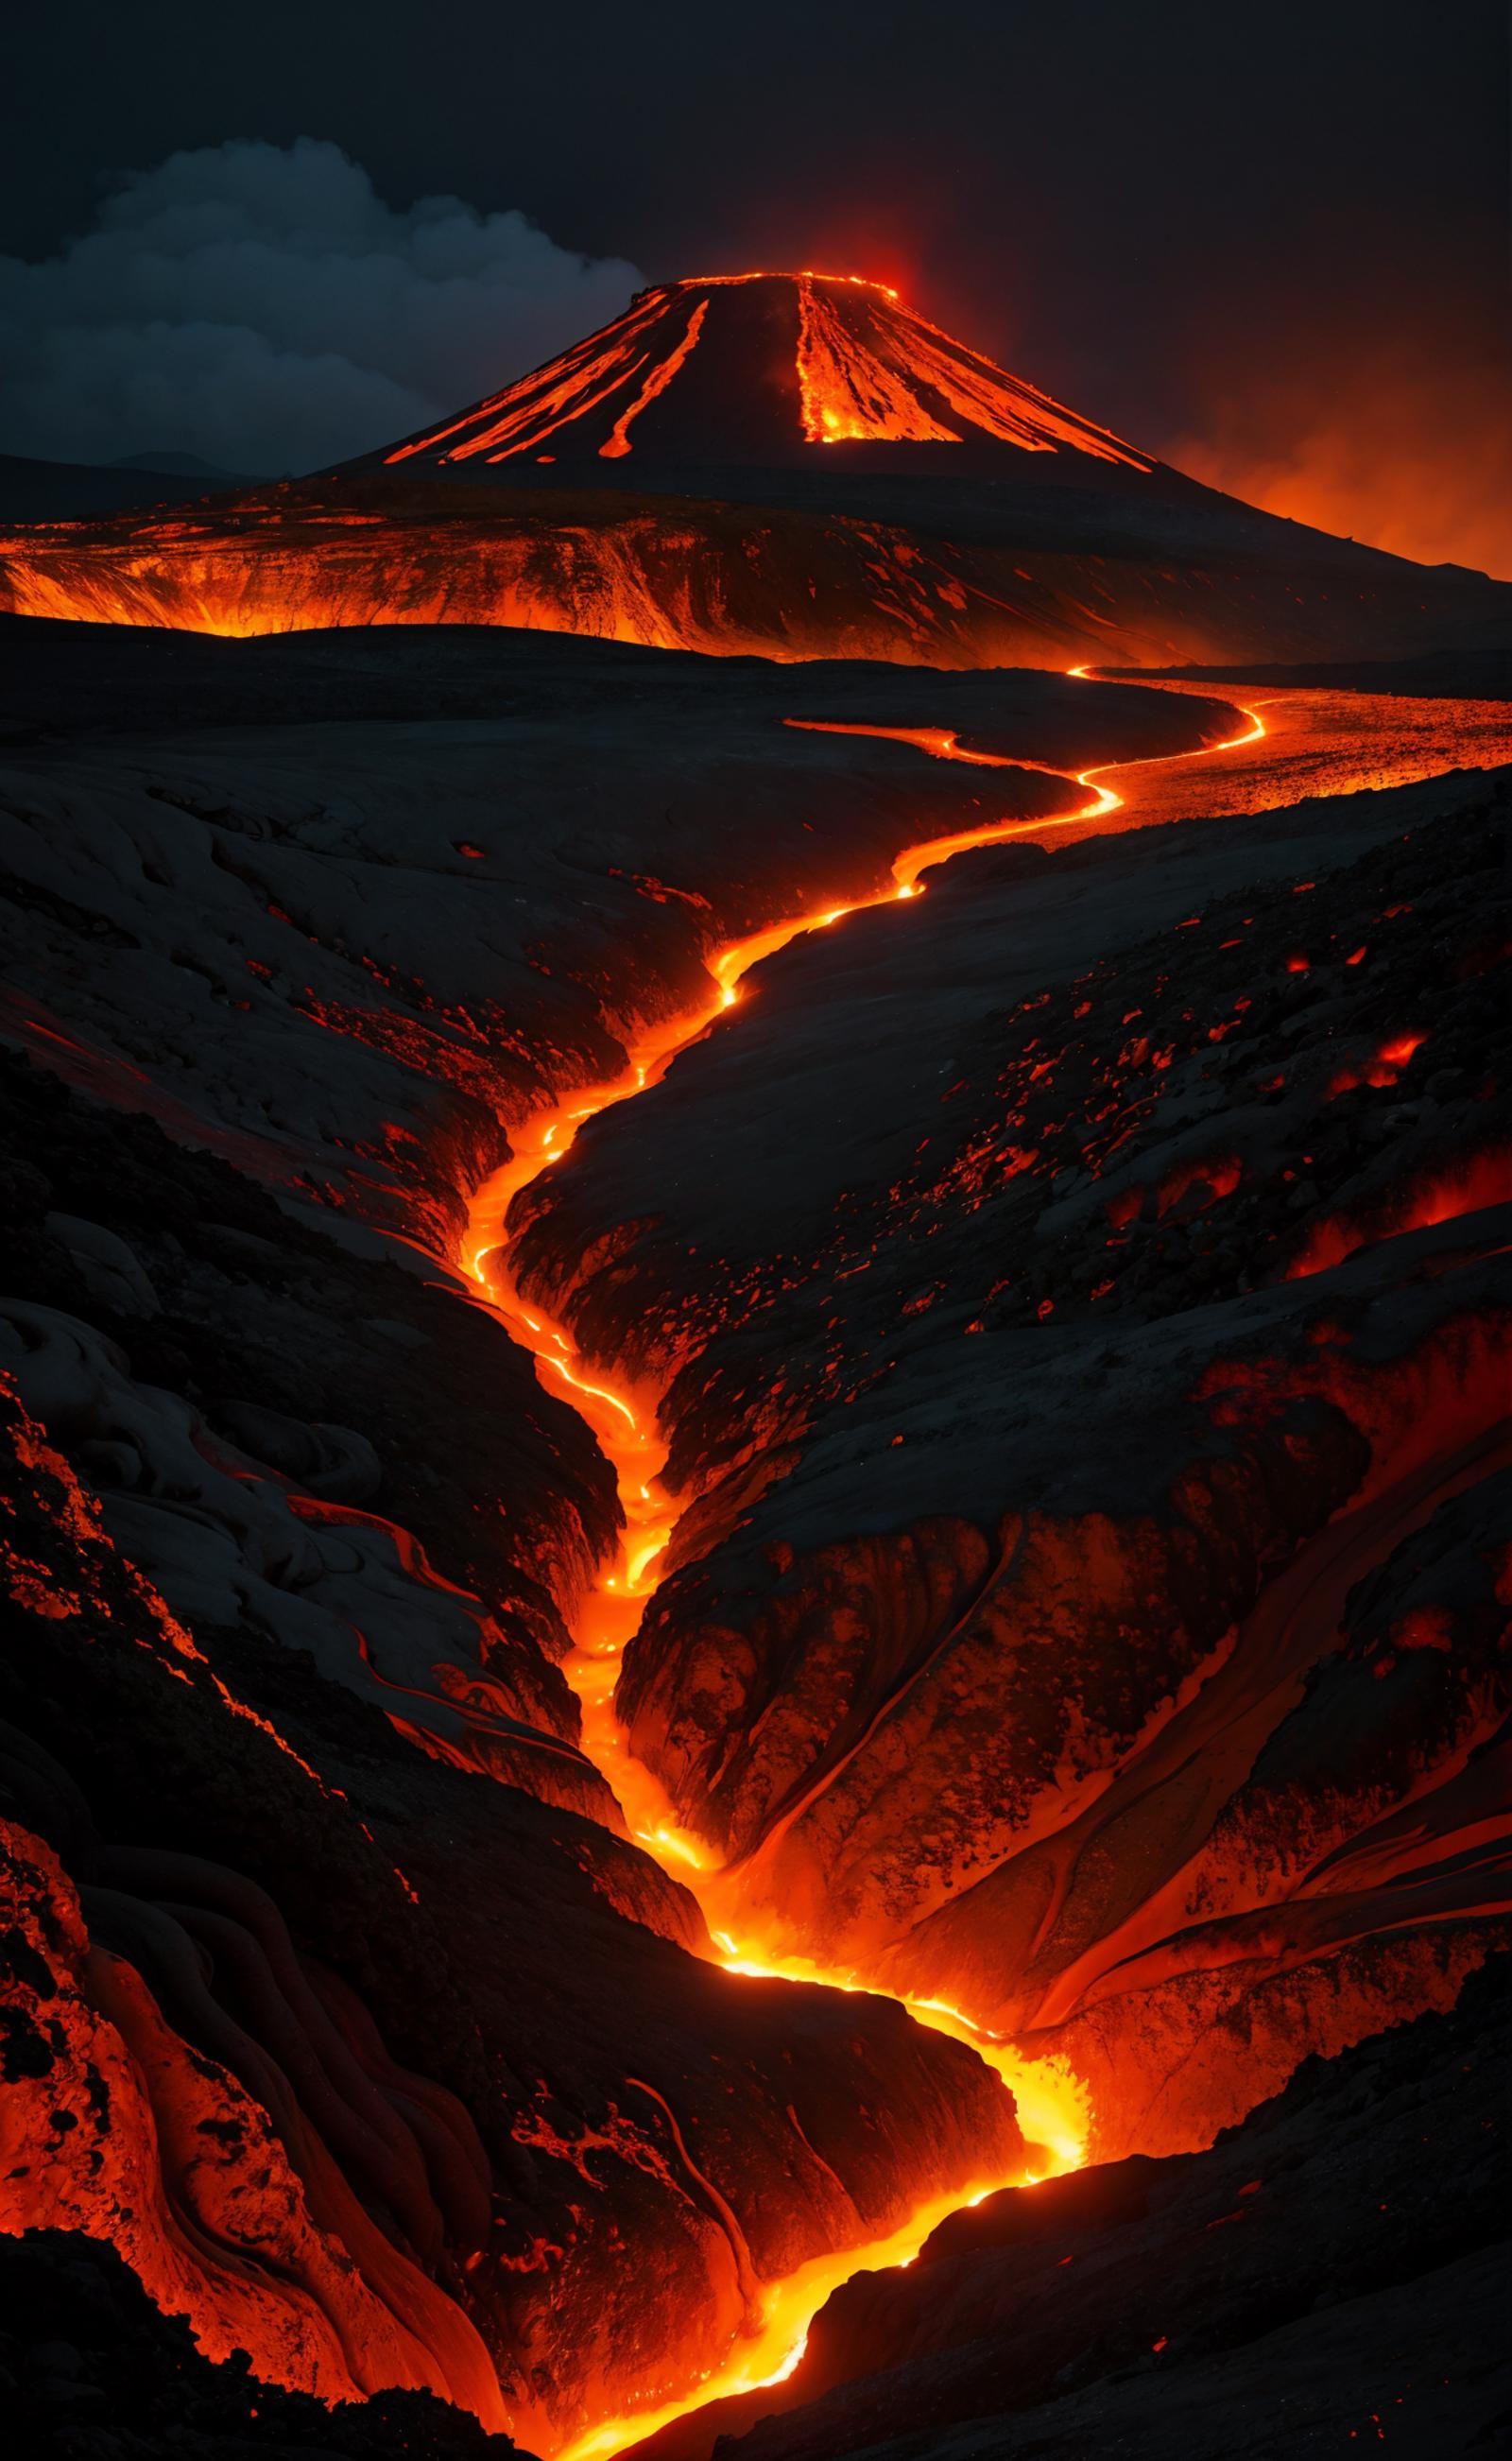 A Stunning Nighttime View of a Mountain with a Red Lava Stream